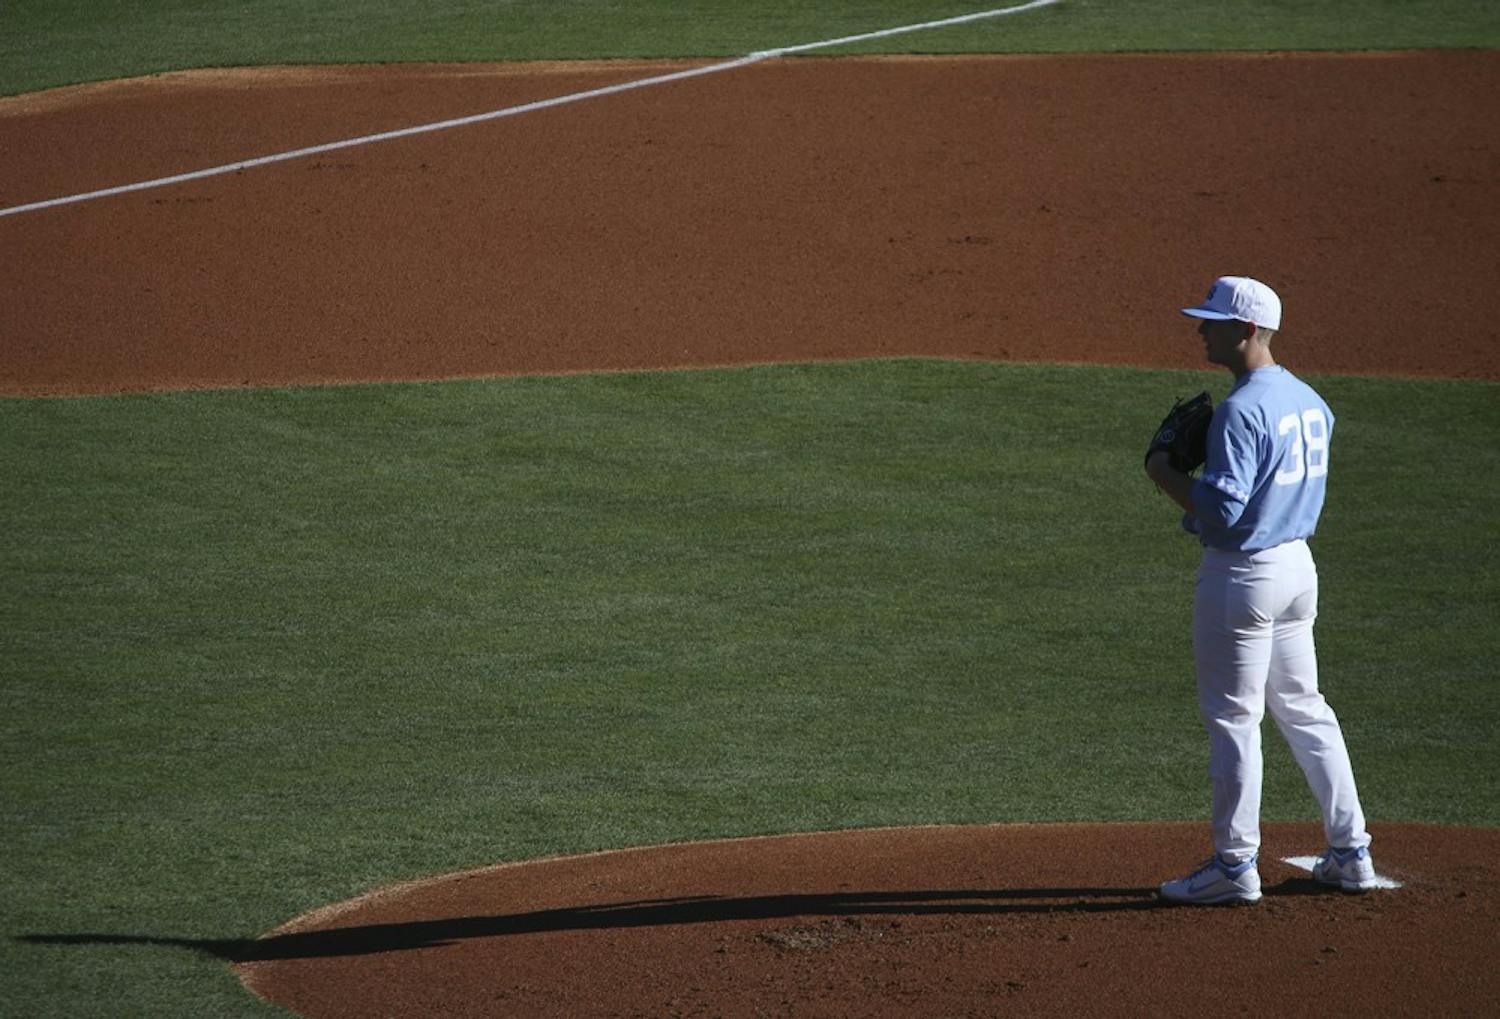 North Carolina pitcher J.B. Bukaukas (38) prepares to throw out the season opening pitch against Kentucky on February 17.